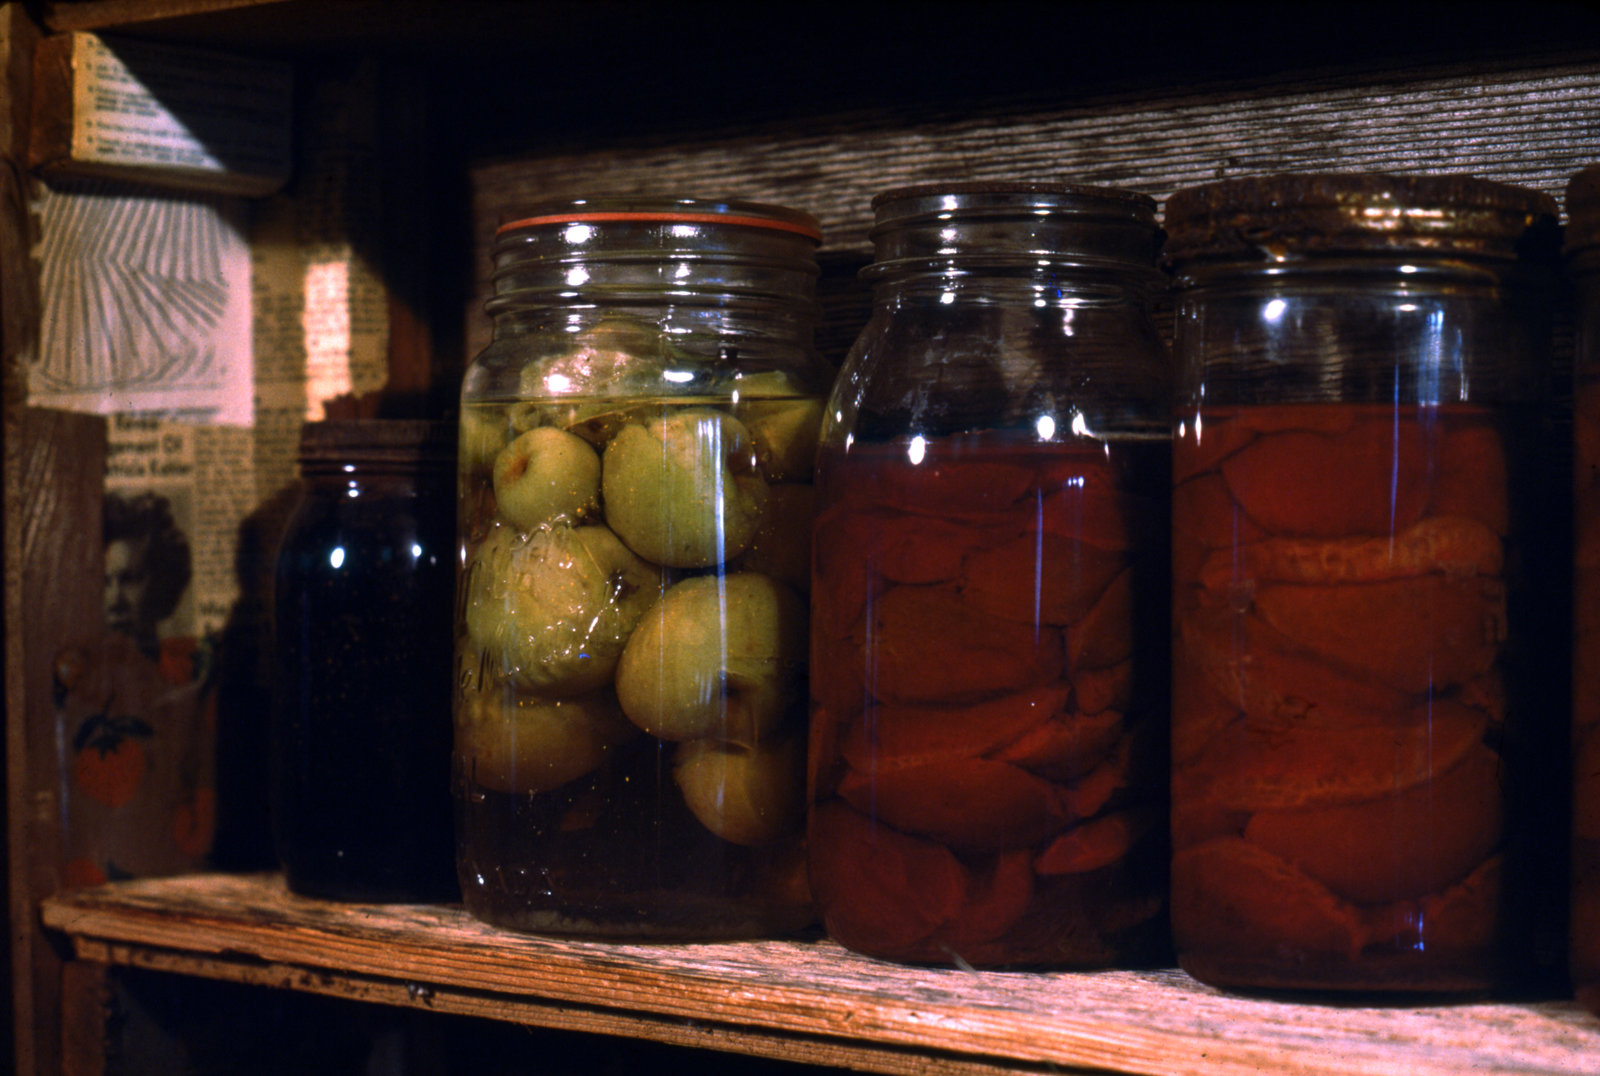 Liz Magor, Time and Mrs. Tiber (detail), 1976, wooden shelf with jars of preserves, recipe box, forks, glass tops, rubber sealers, metal lids, cardboard boxes, enamel cup, tin can, 84 x 36 x 13 in. (214 x 91 x 32 cm)